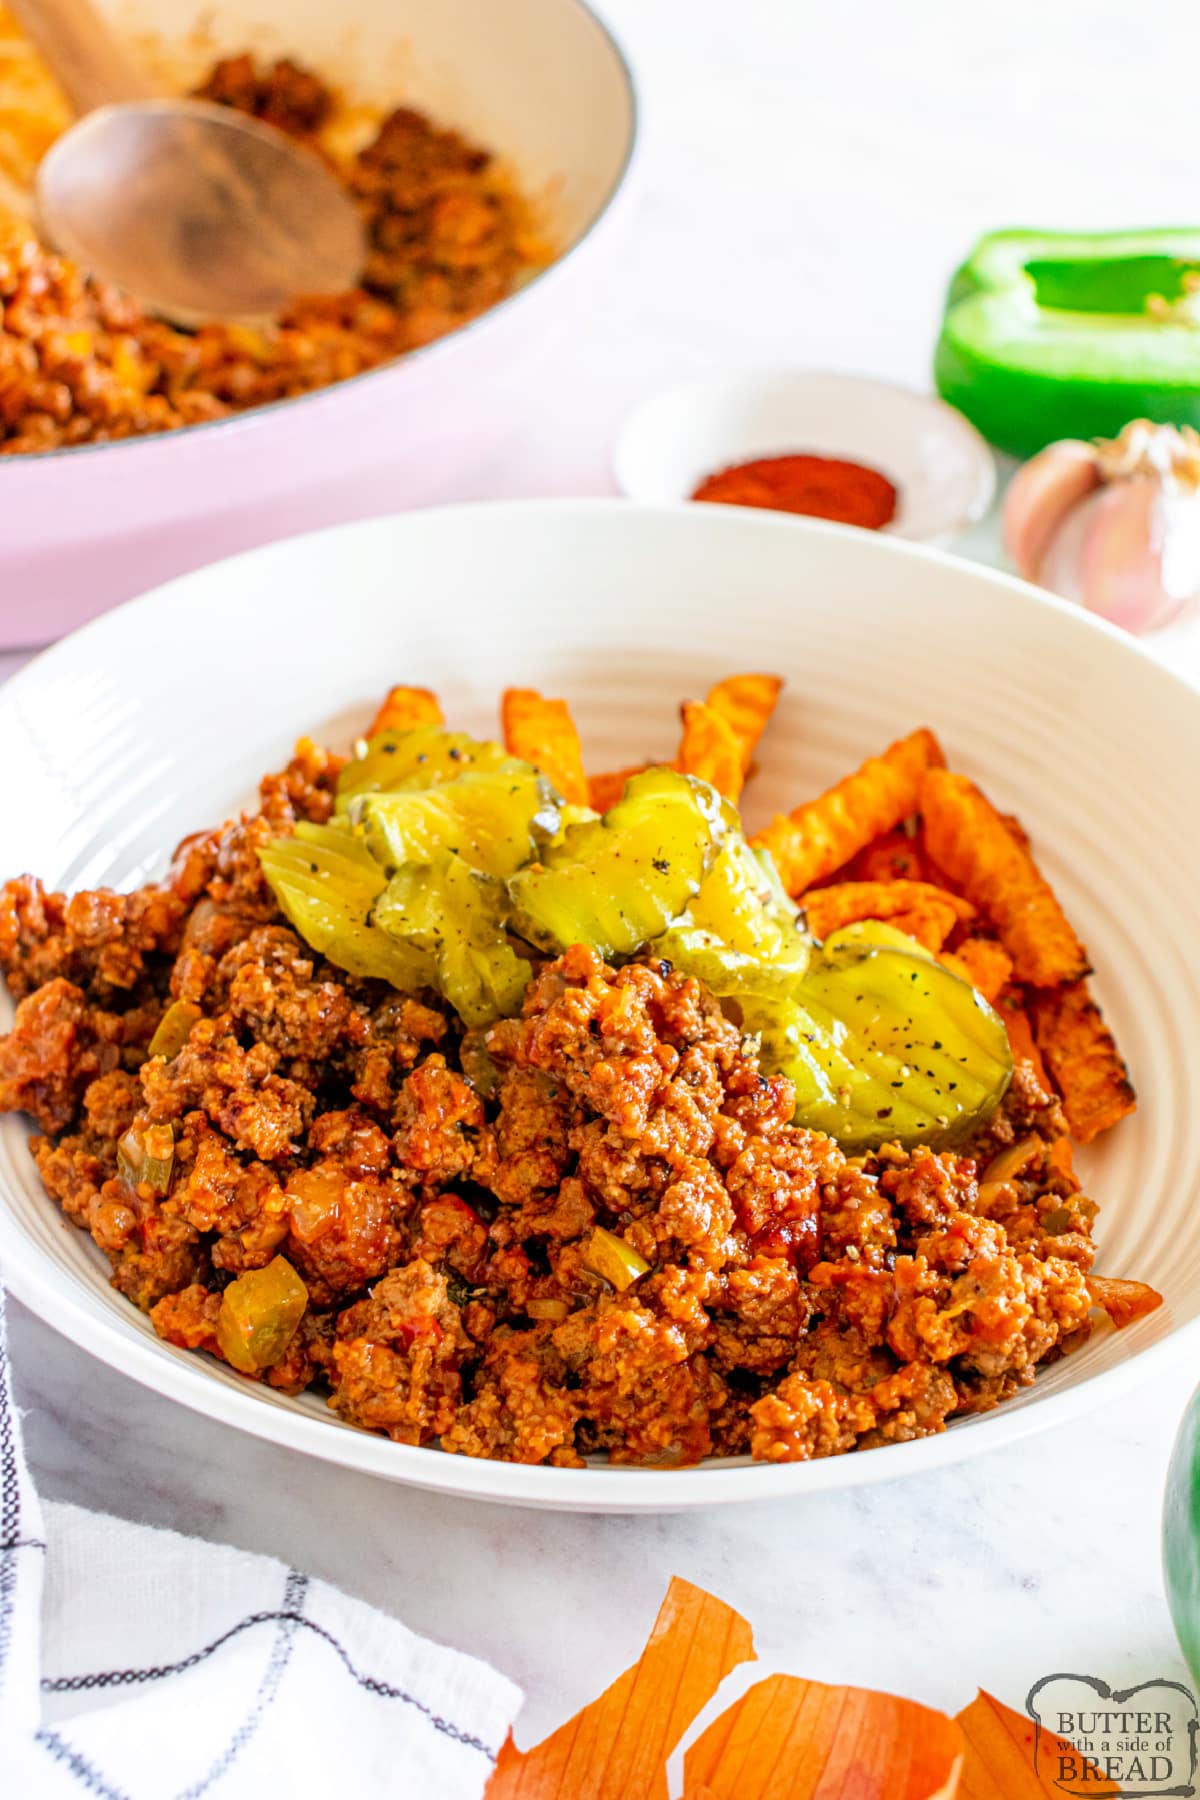 Sloppy Joe Bowls are made with ground beef, onions, and peppers cooked with lots of spice and flavors. This recipe is a delicious high-protein, low-carb meal that is ready to eat in less than 20 minutes! 